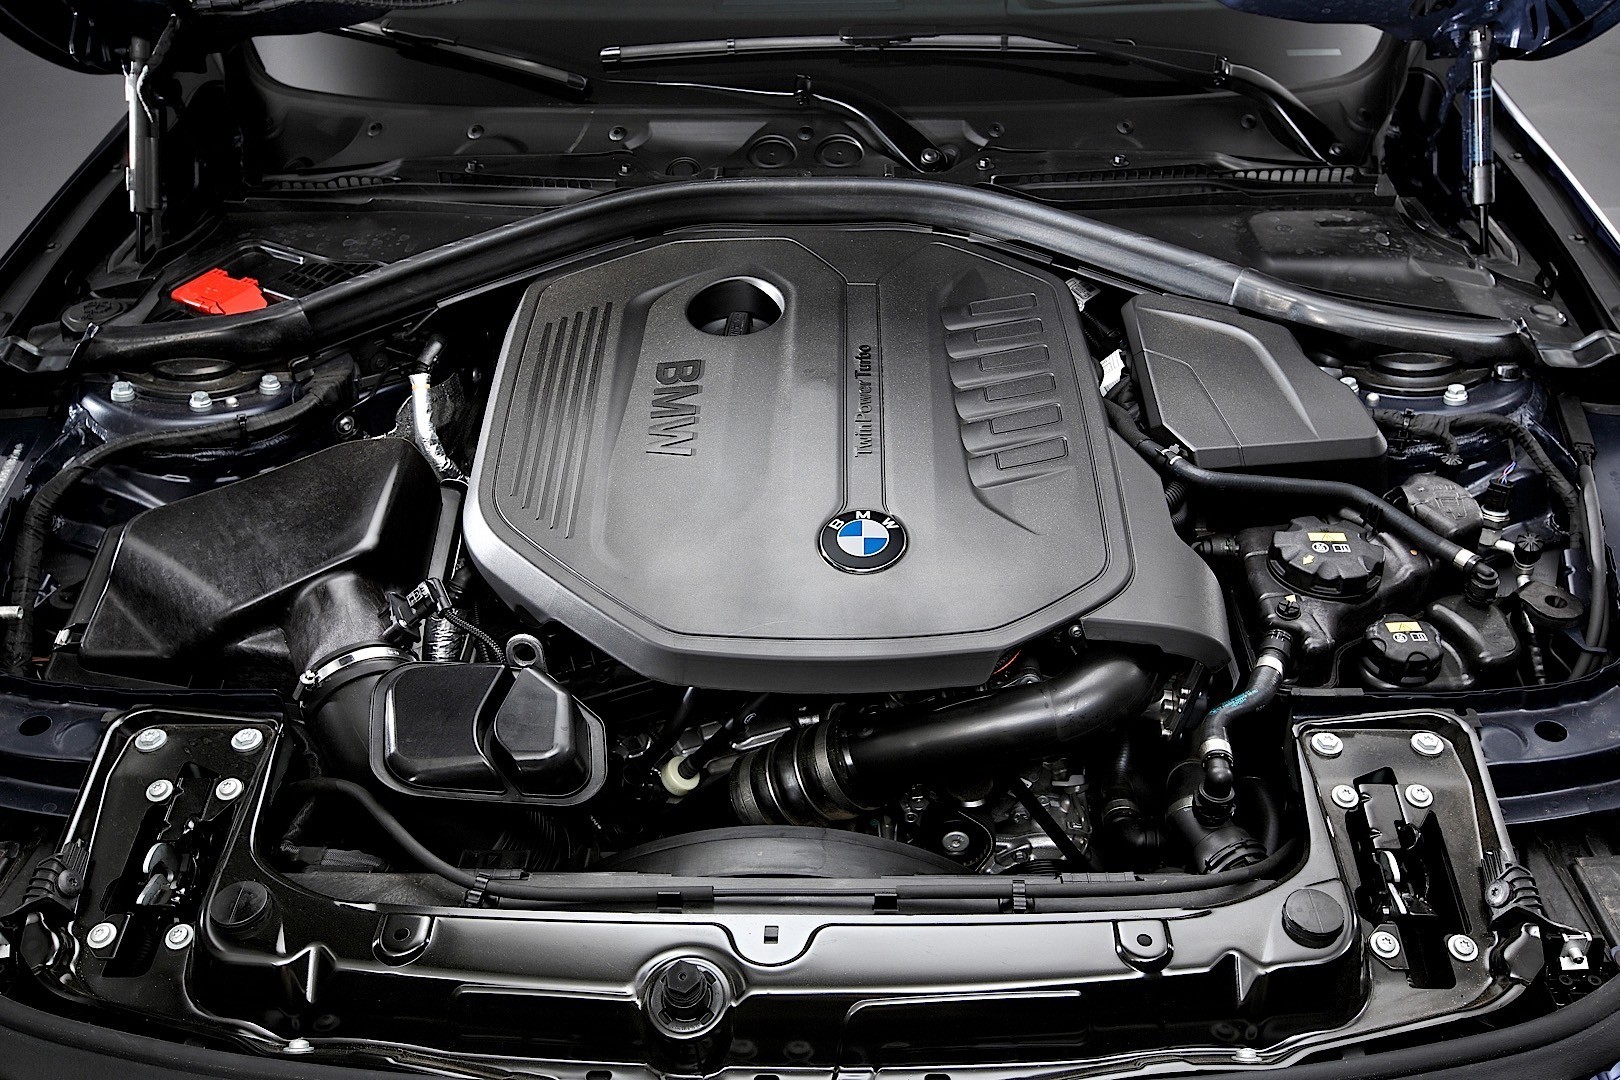 BMW's Hybrid Models to Use Electric Only Mode in Polluted Cities